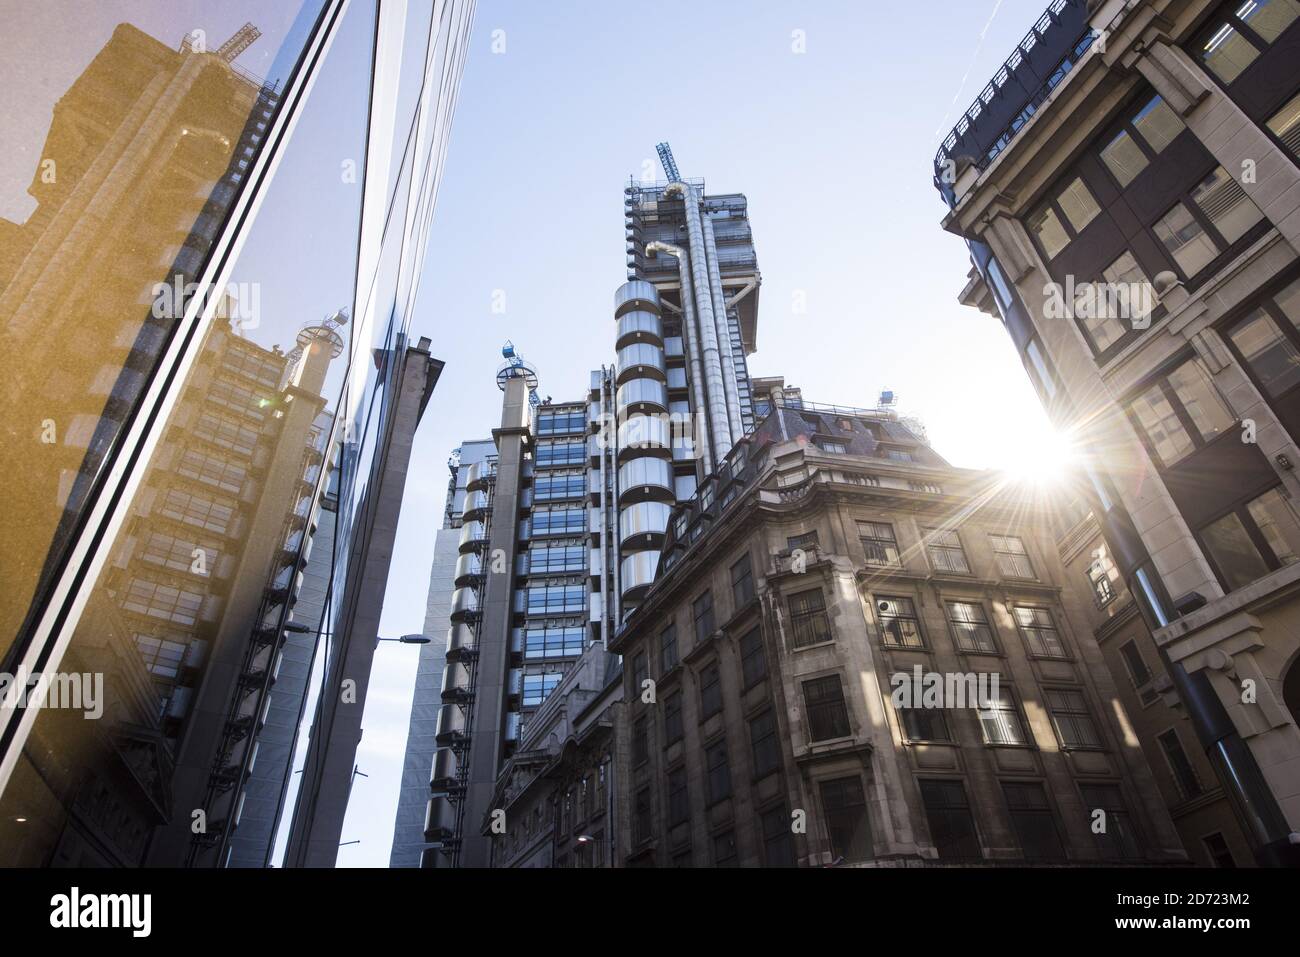 General view of the Lloyds Building in the City of London. September 30th will mark 100 days since the UK voted to leave the EU, prompting the insurance firm to make plans to open a subsidiary abroad to allow it to continue trading across Europe.  Stock Photo